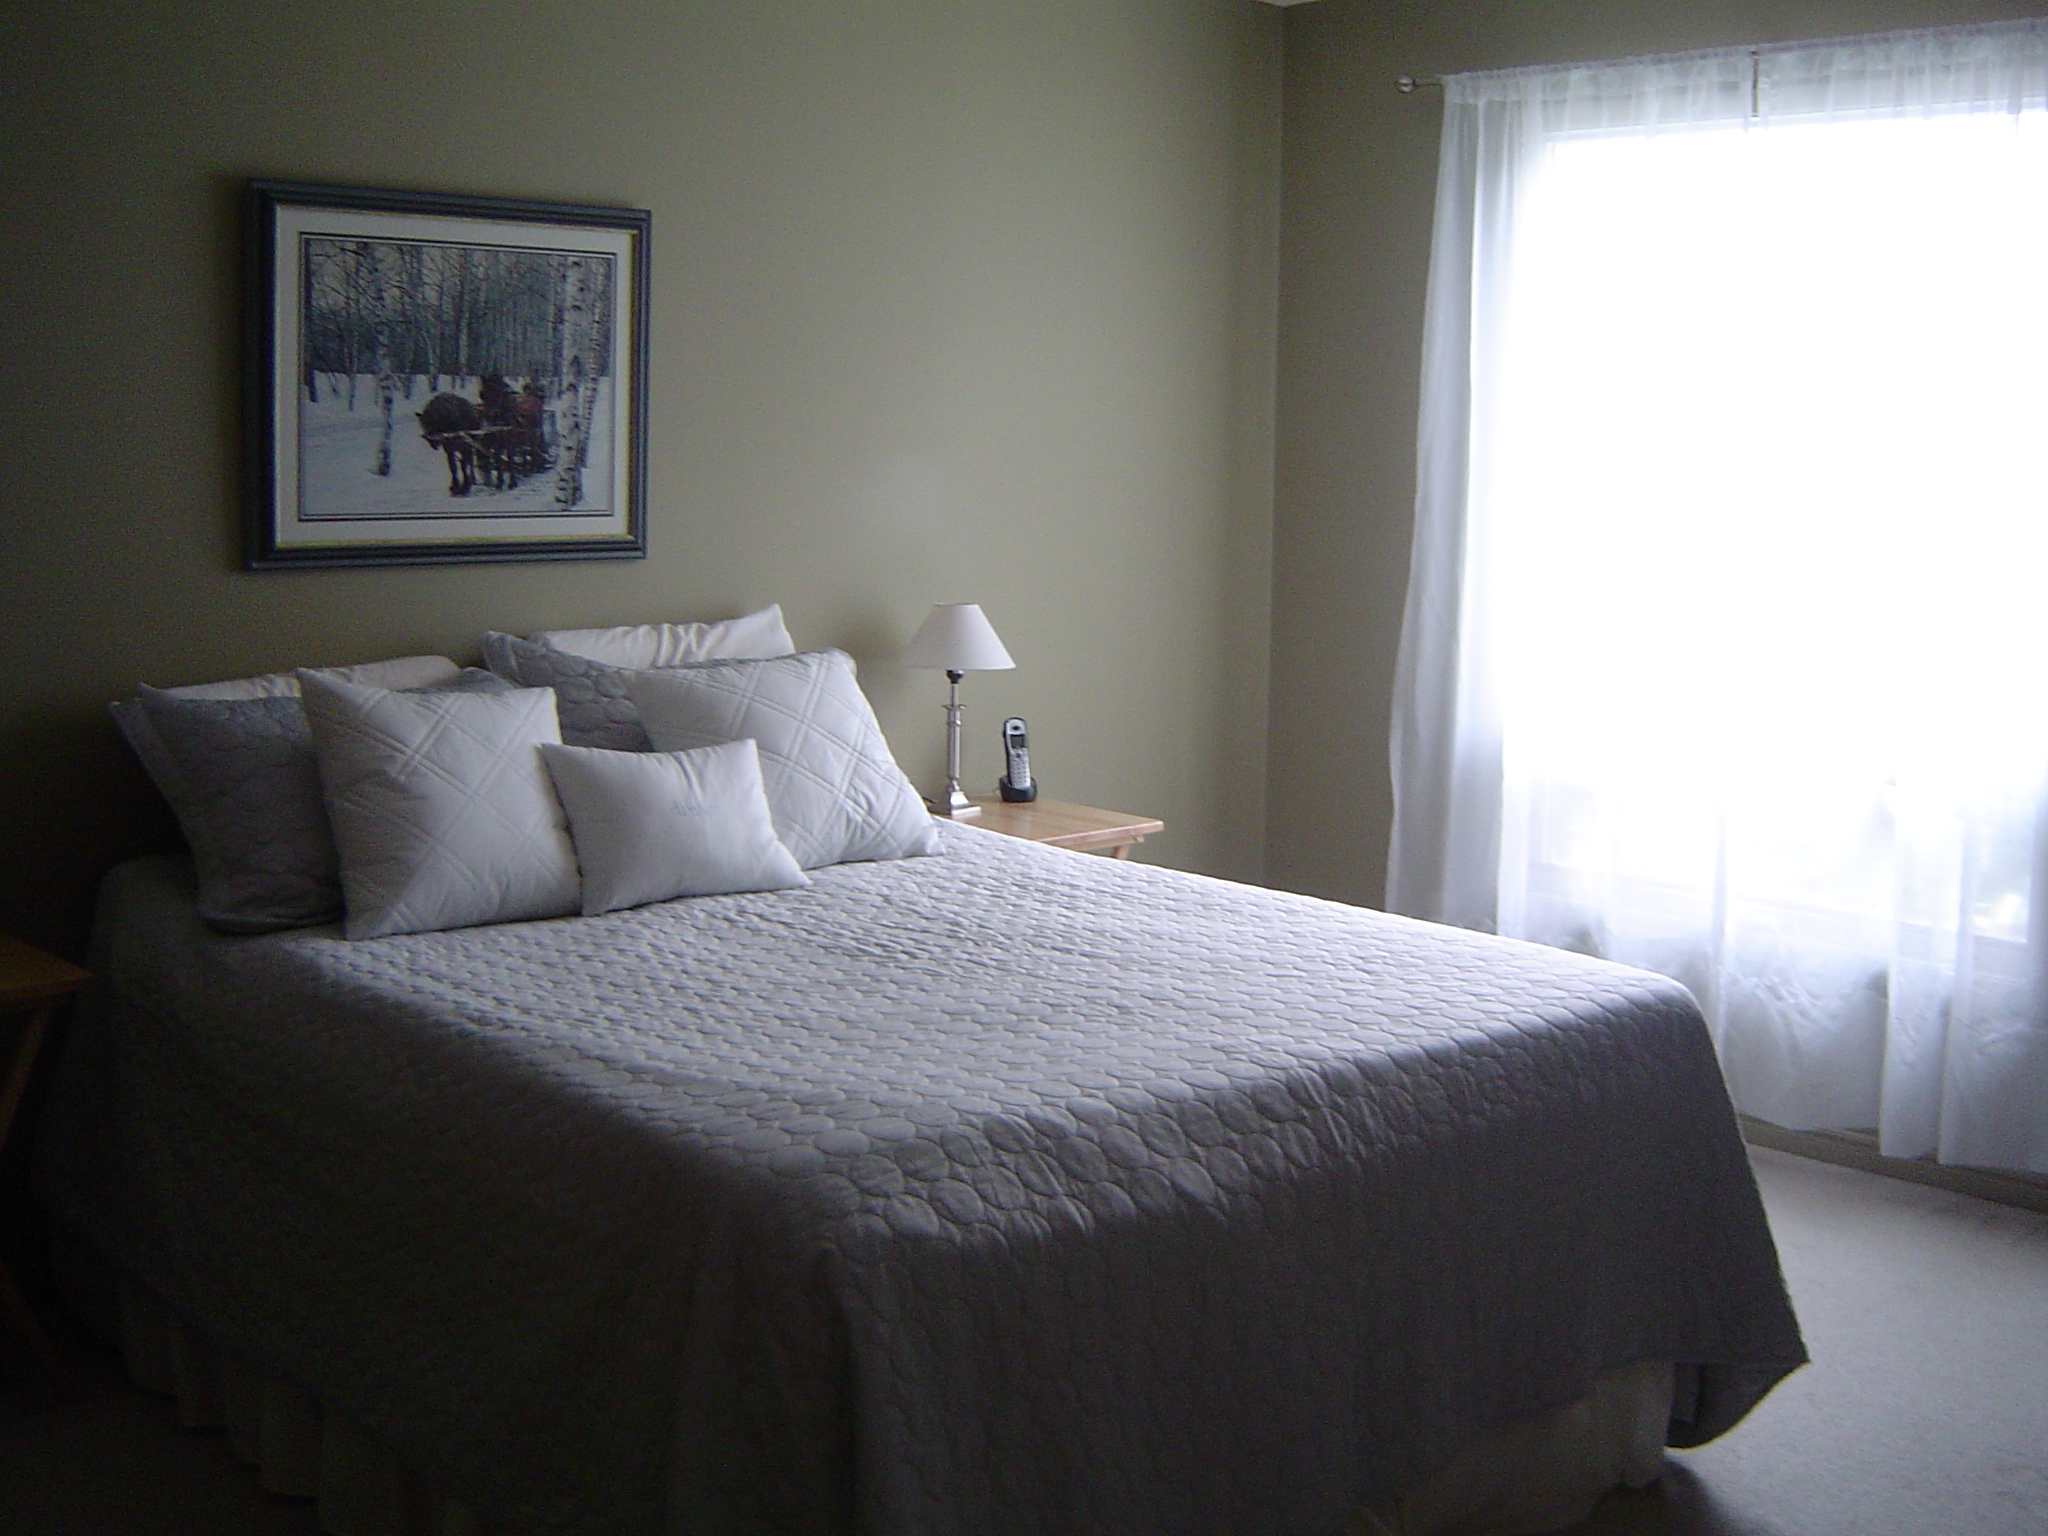 Upstairs are 3 nice sized bedrooms, the master is large enough for your king size bed